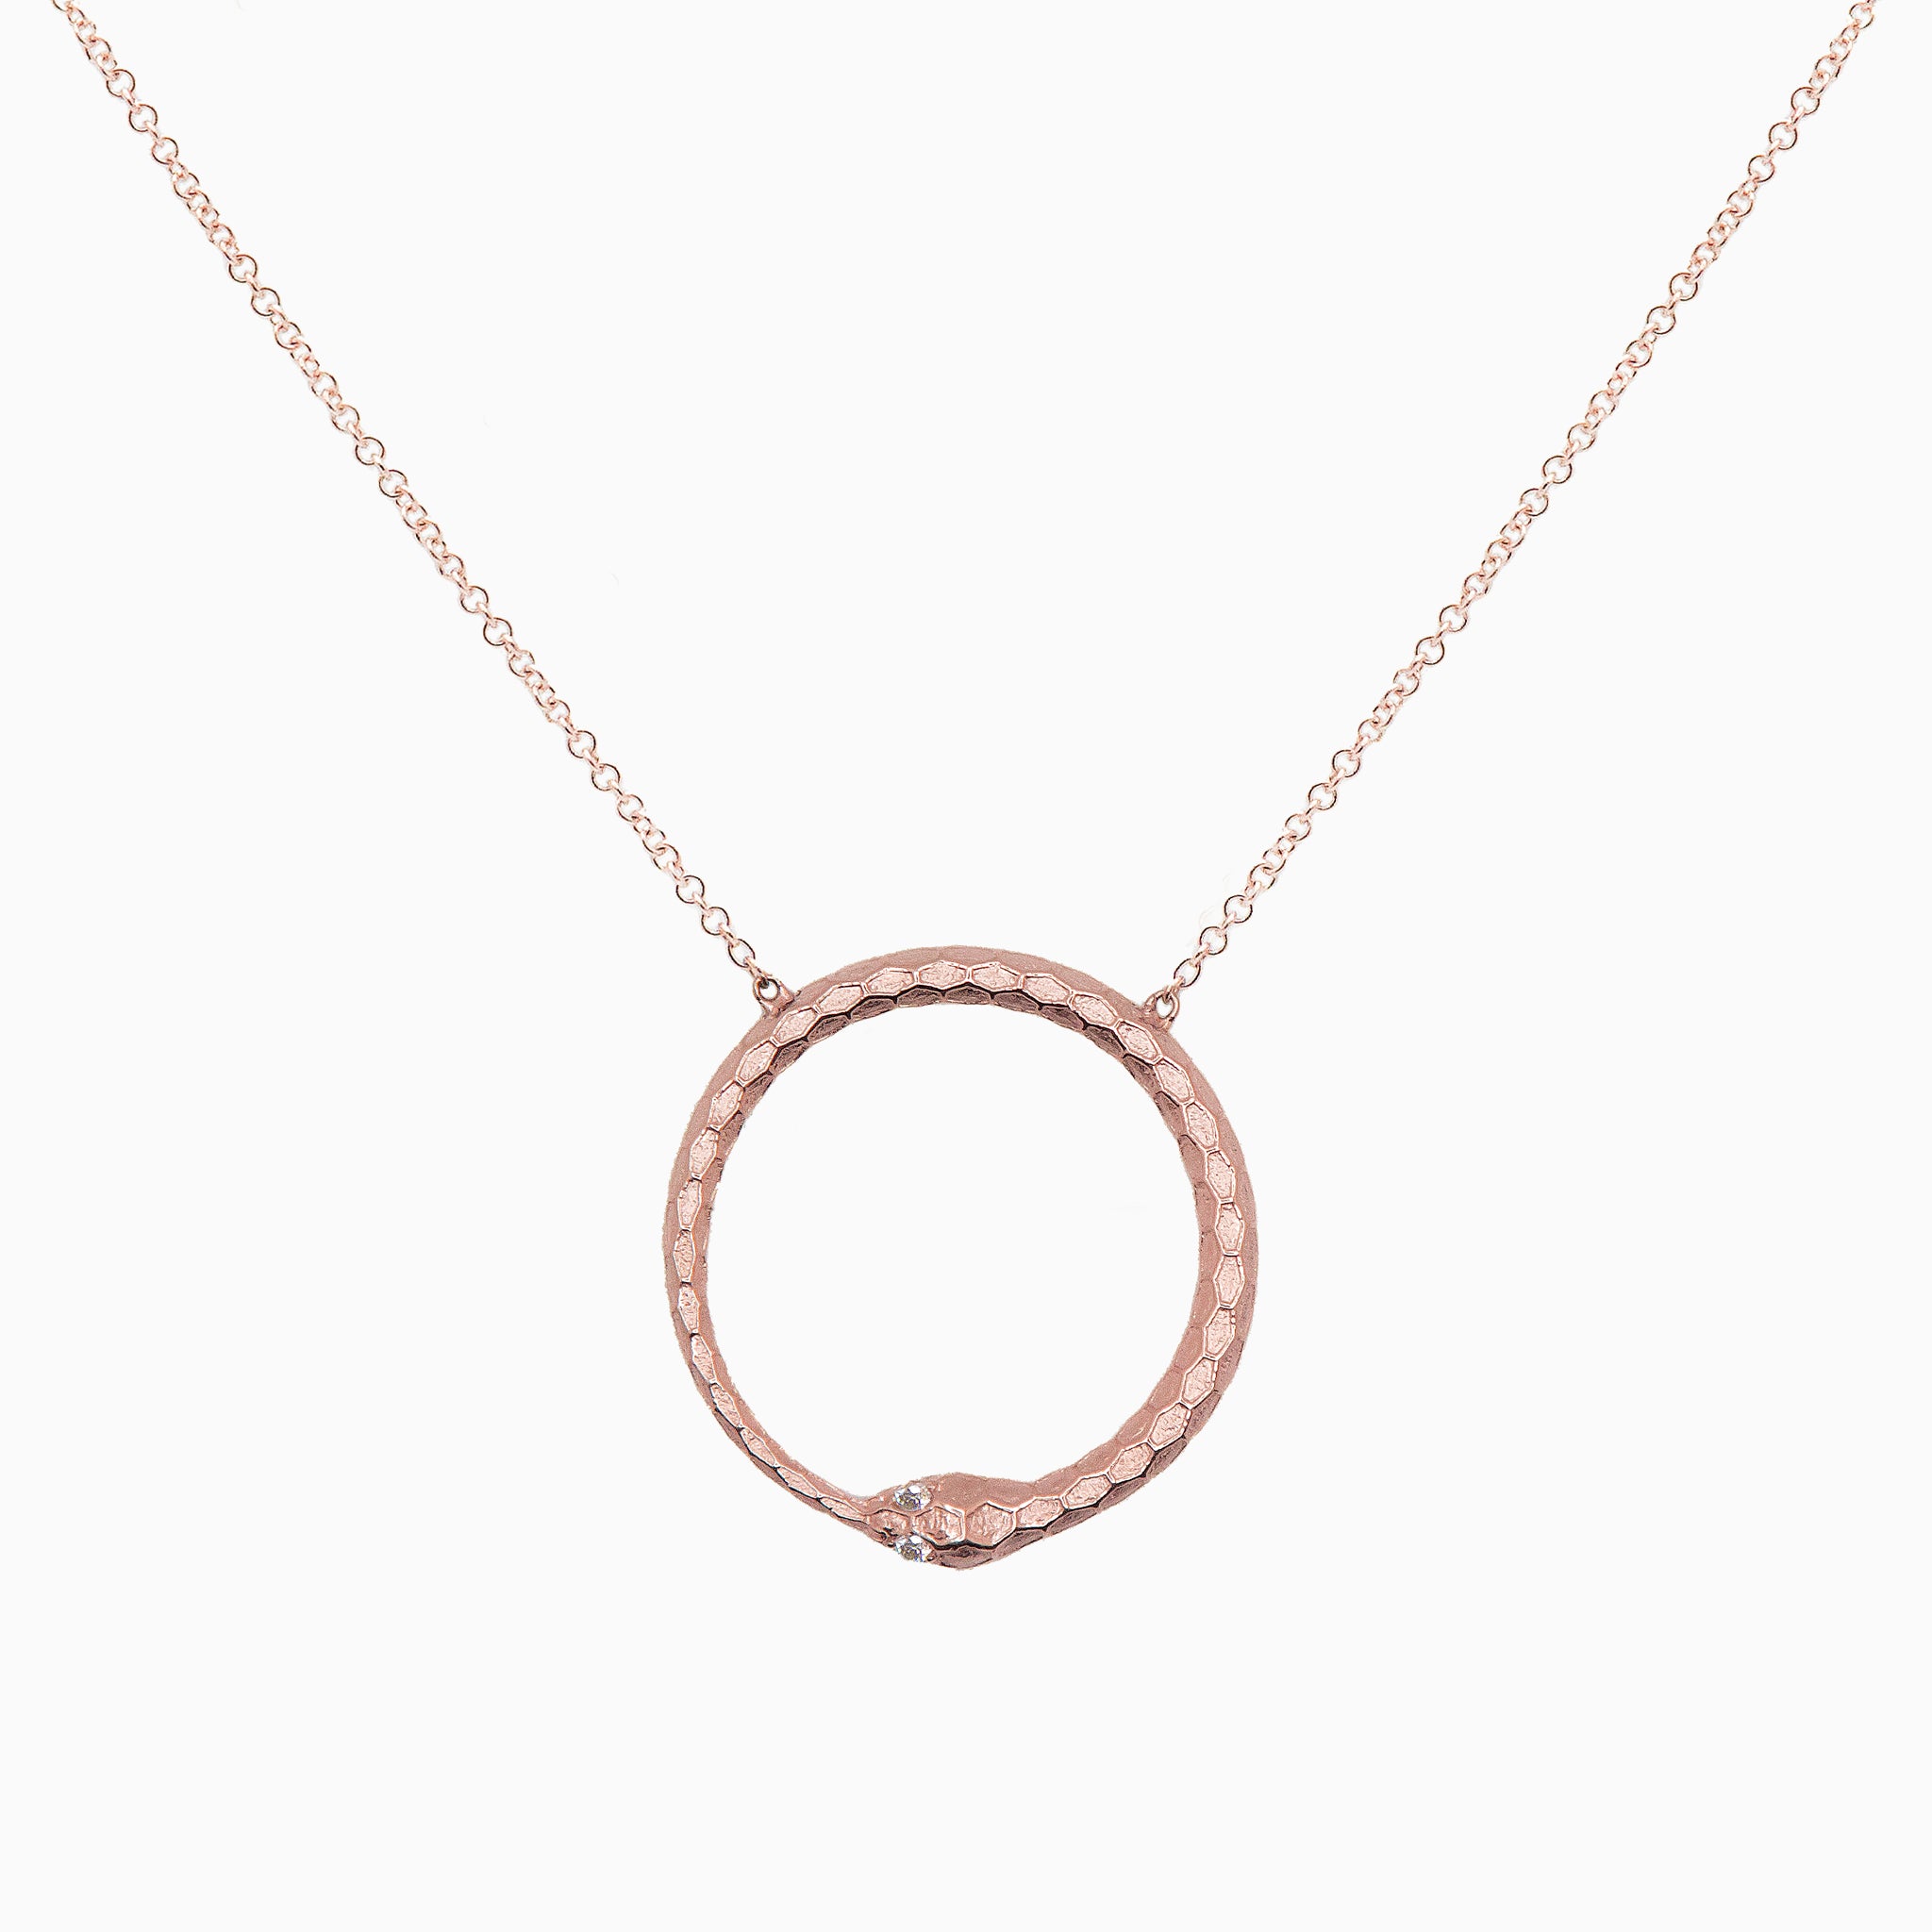 14k Rose Gold 20mm Ouroboros Snake with Diamond Eyes Necklace